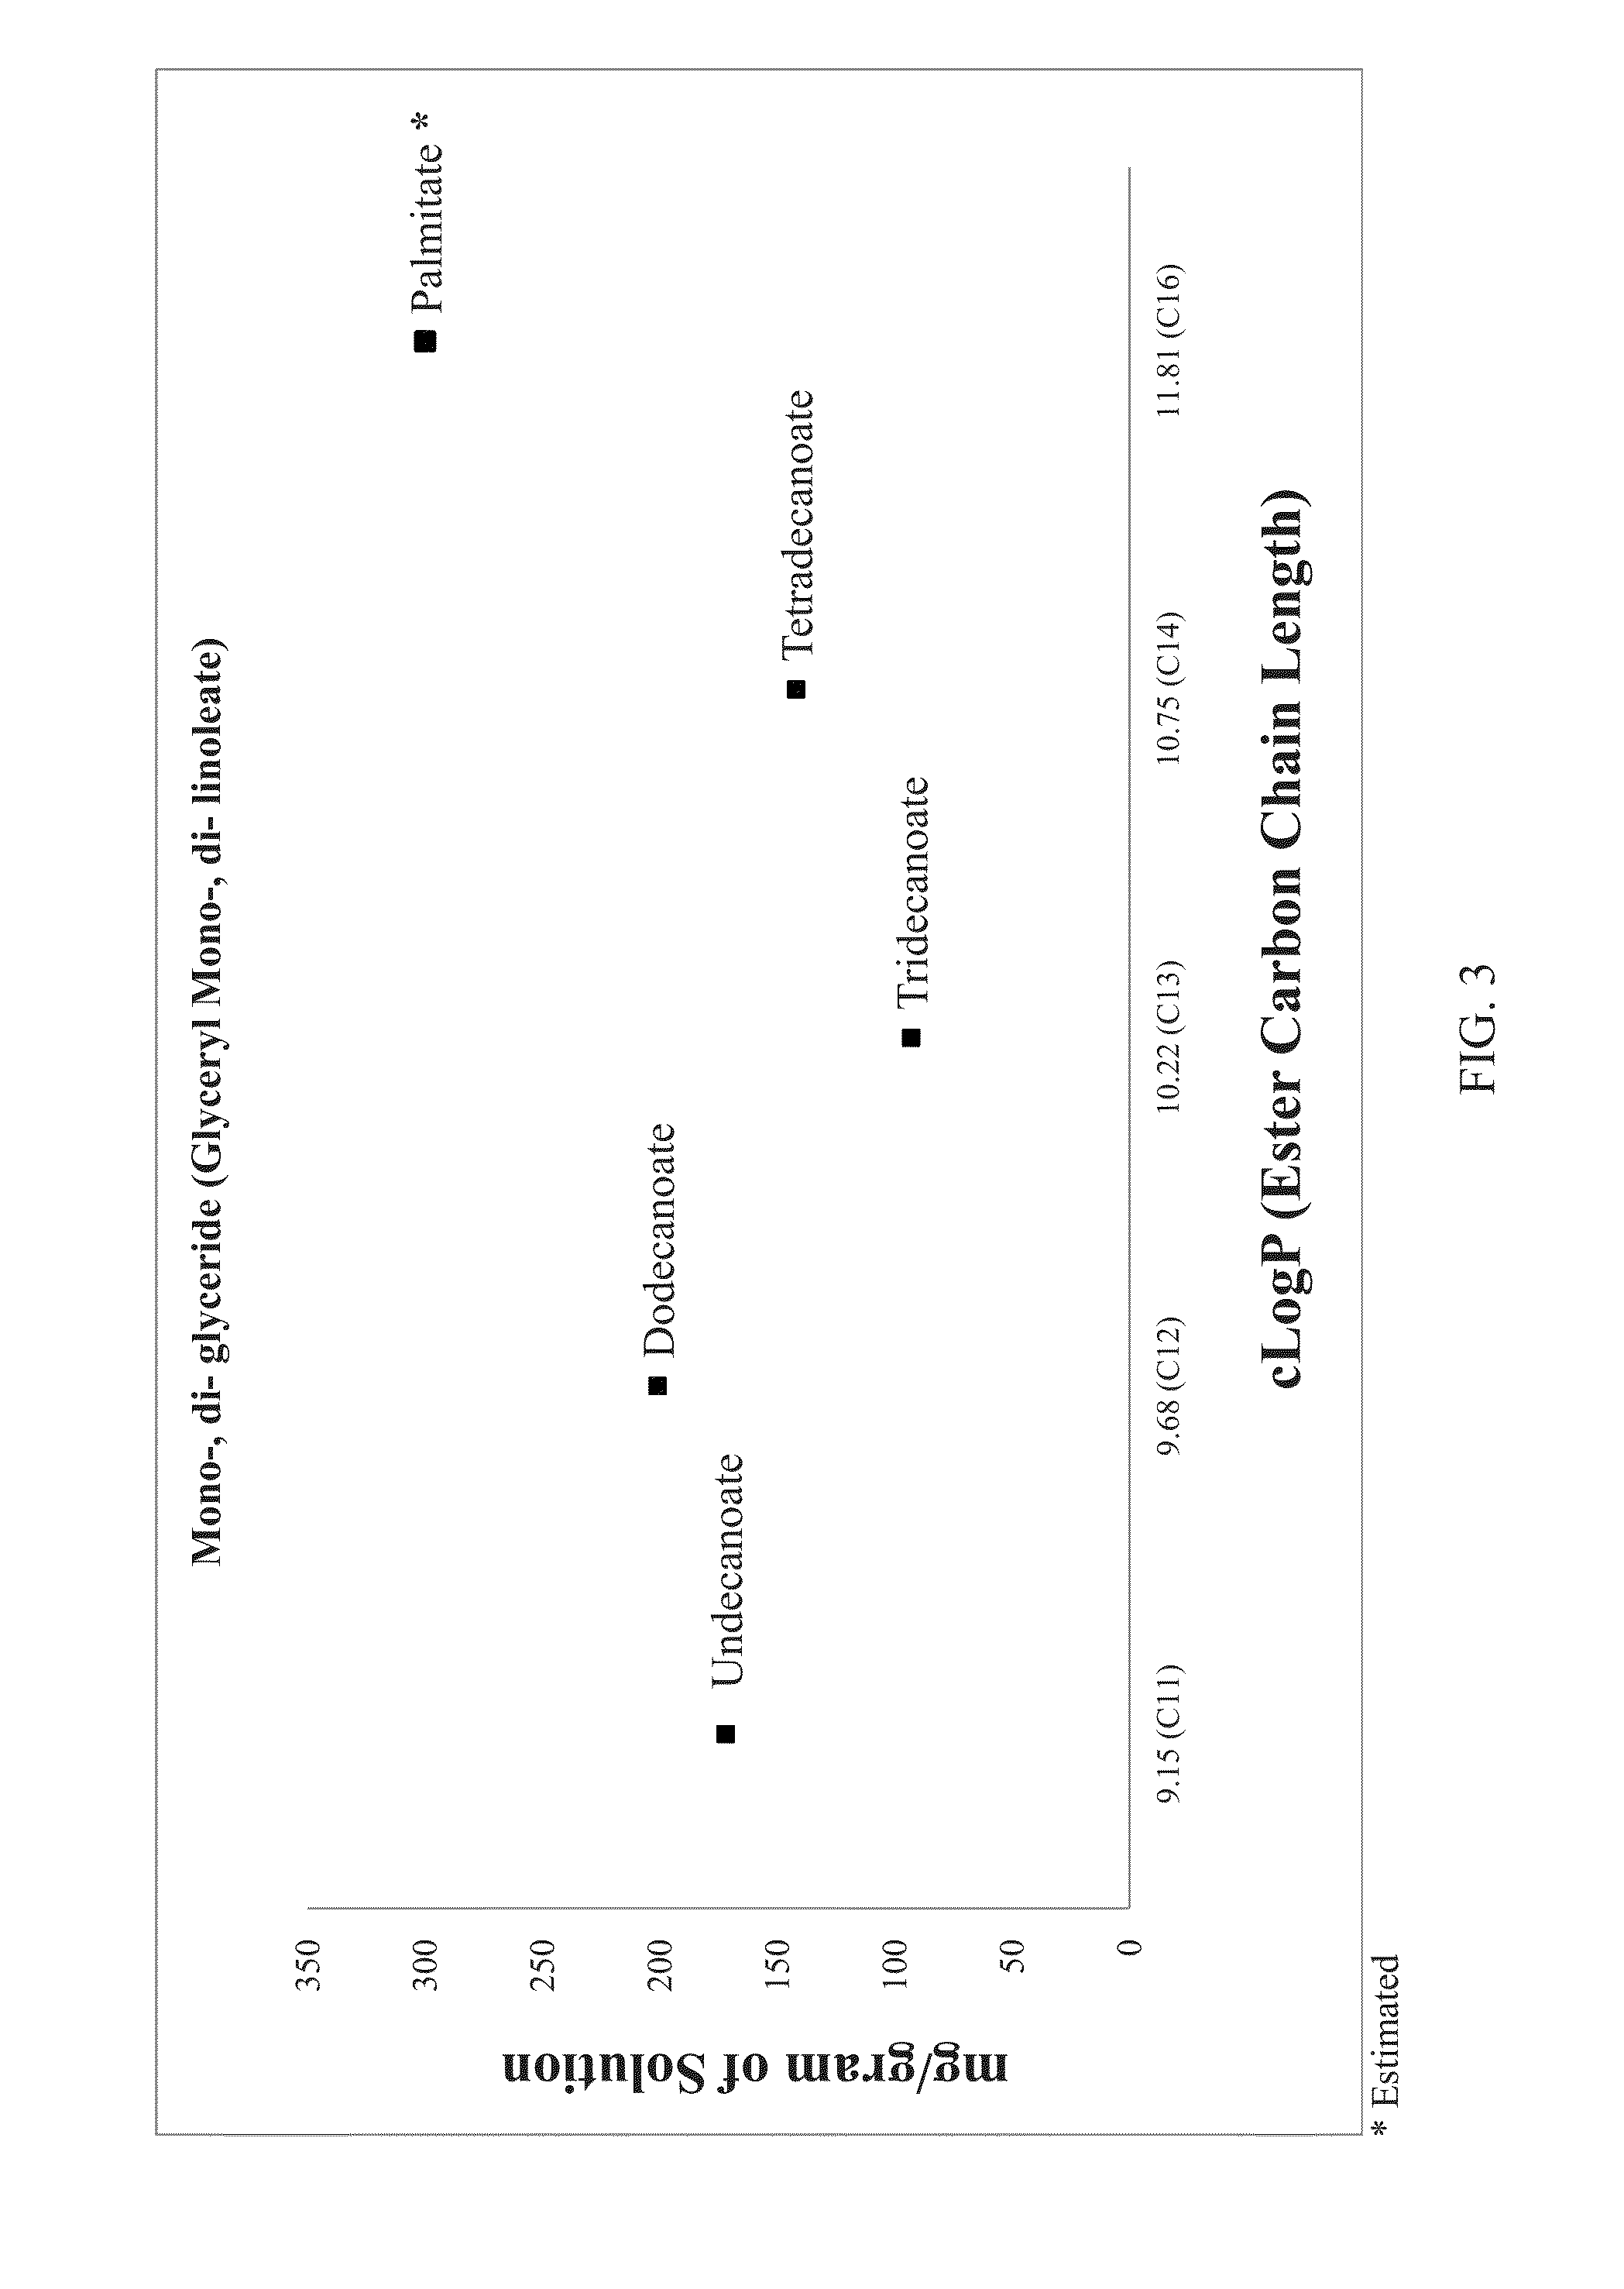 Lipobalanced long chain testosterone esters for oral delivery